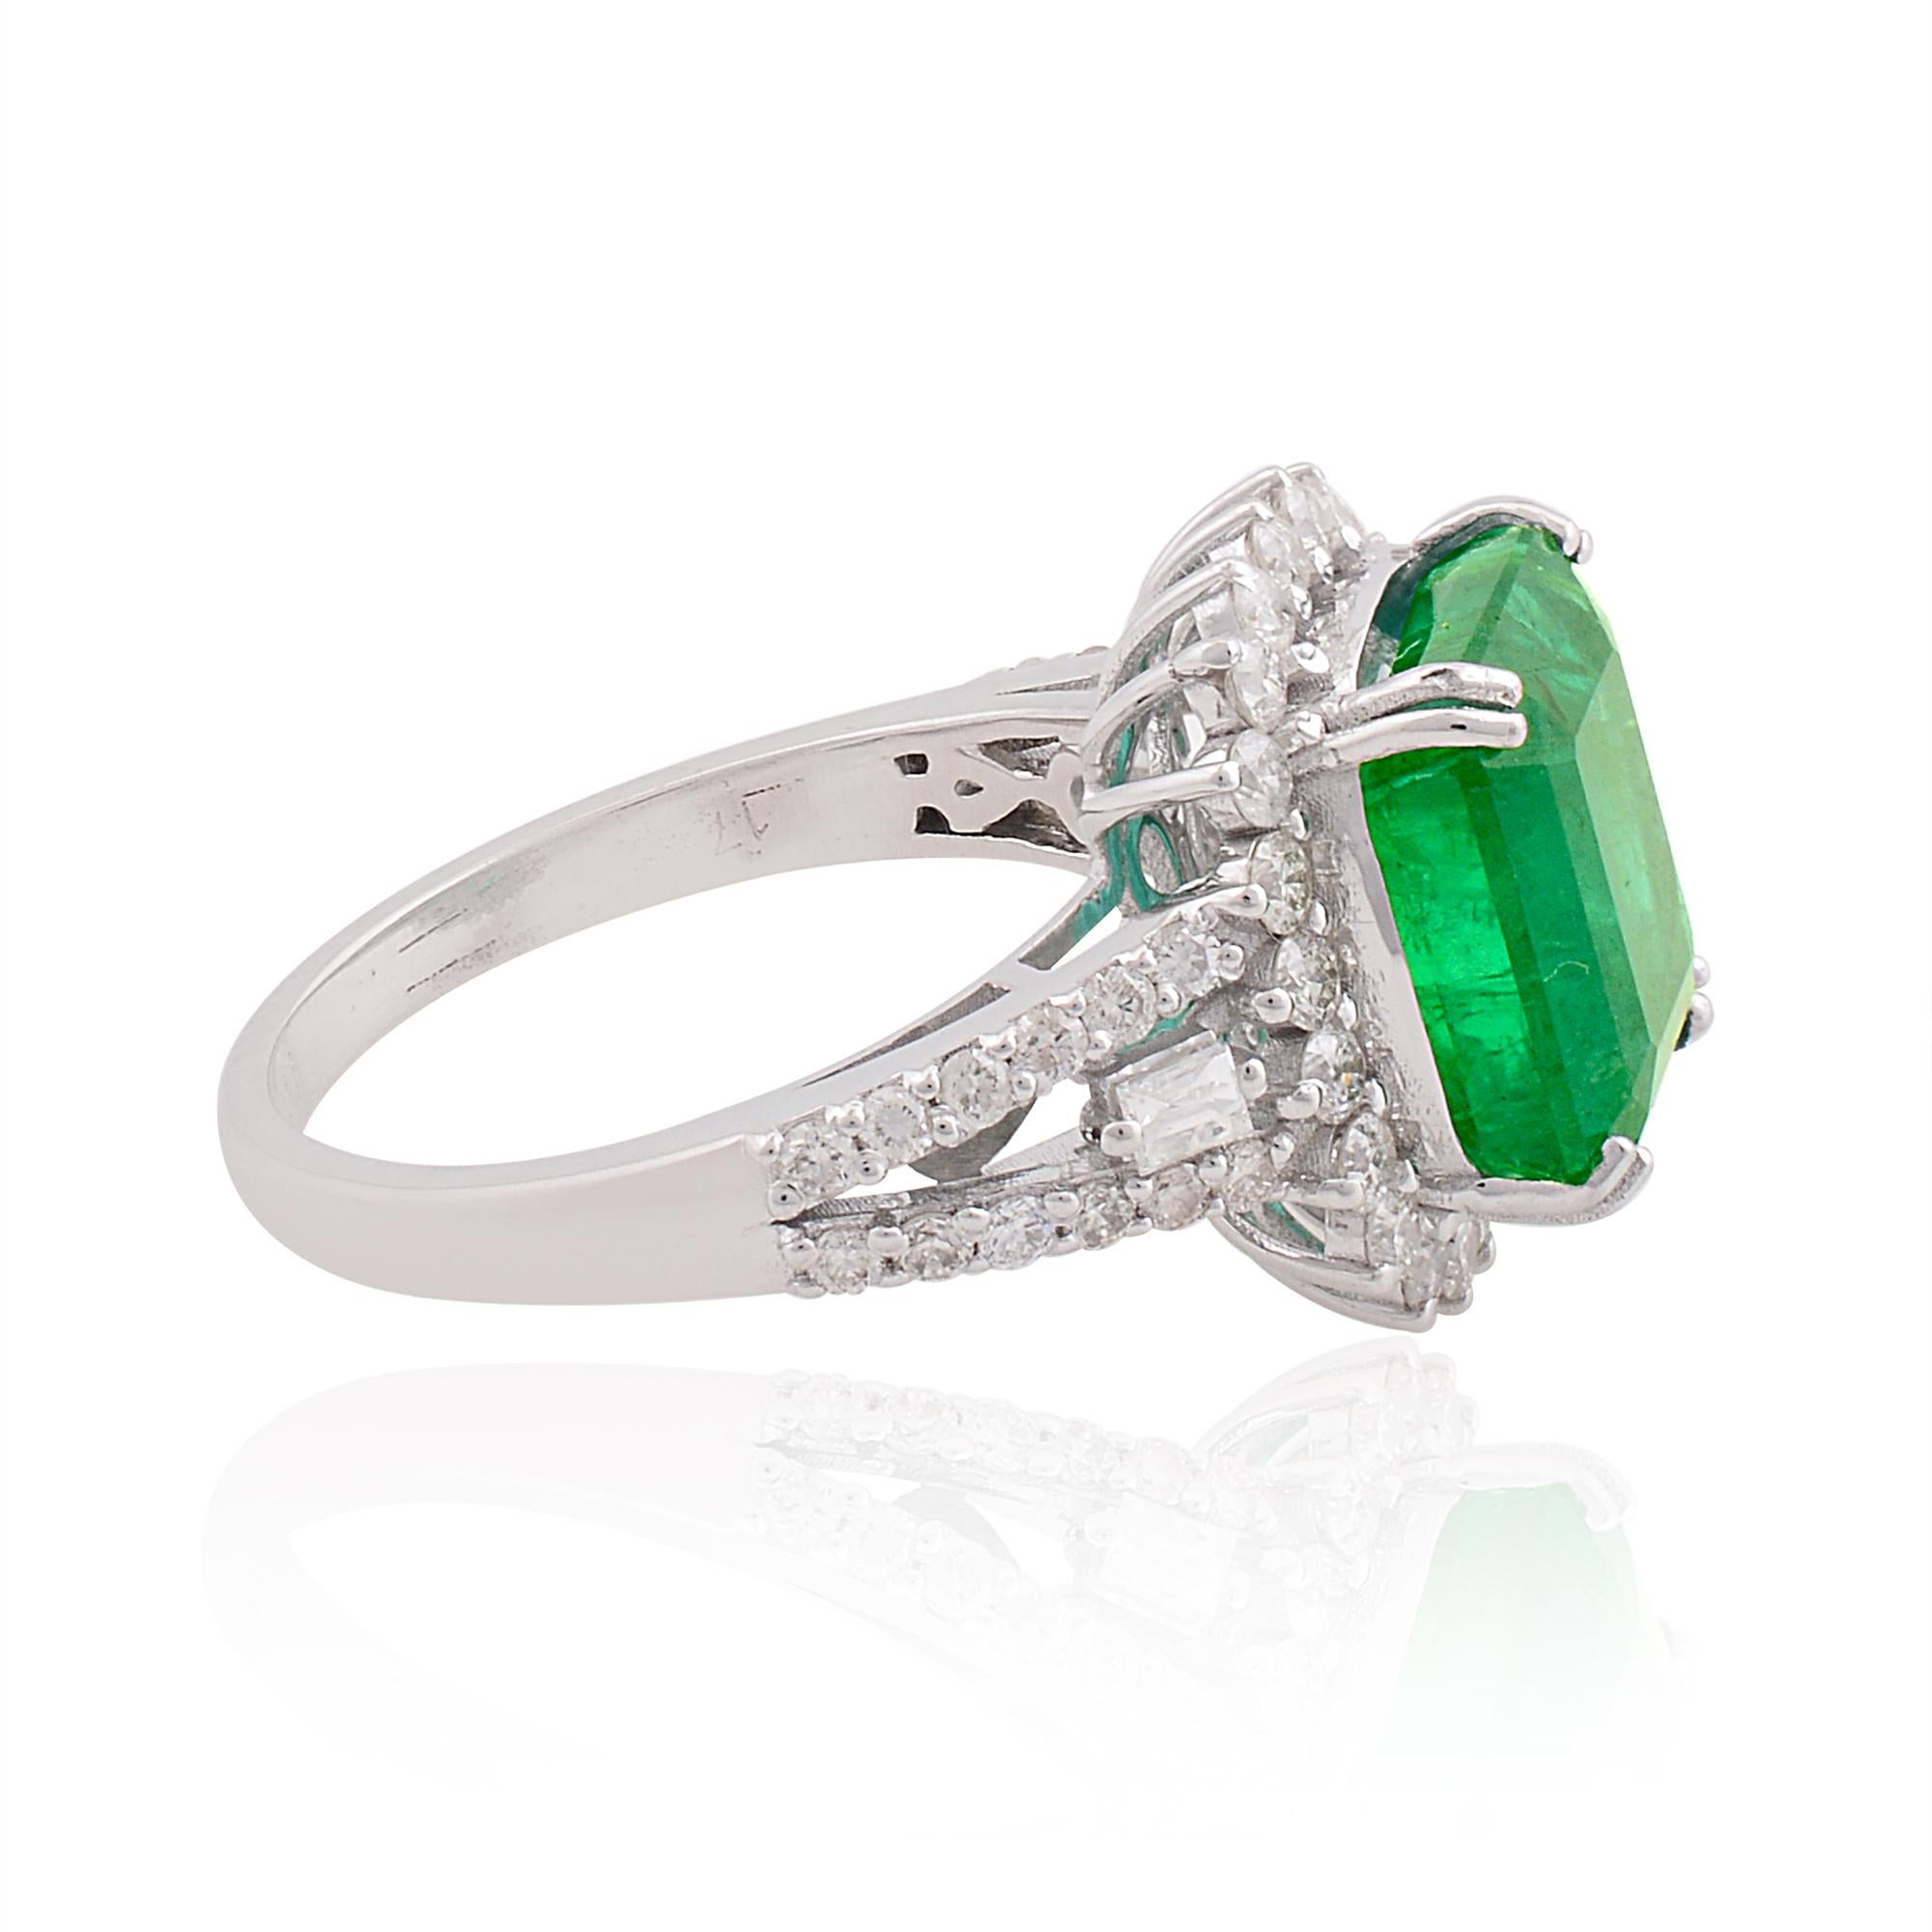 Item Code :- STR-2030
Gross Wt. :- 4.66 gm
10k Solid White Gold Wt. :- 3.46 gm
Natural Diamond Wt. :- 0.92 Ct. ( AVERAGE DIAMOND CLARITY SI1-SI2 & COLOR H-I )
Zambian Emerald Wt. :- 5.08 Ct.
Ring Size :- 7 US & All size available

✦